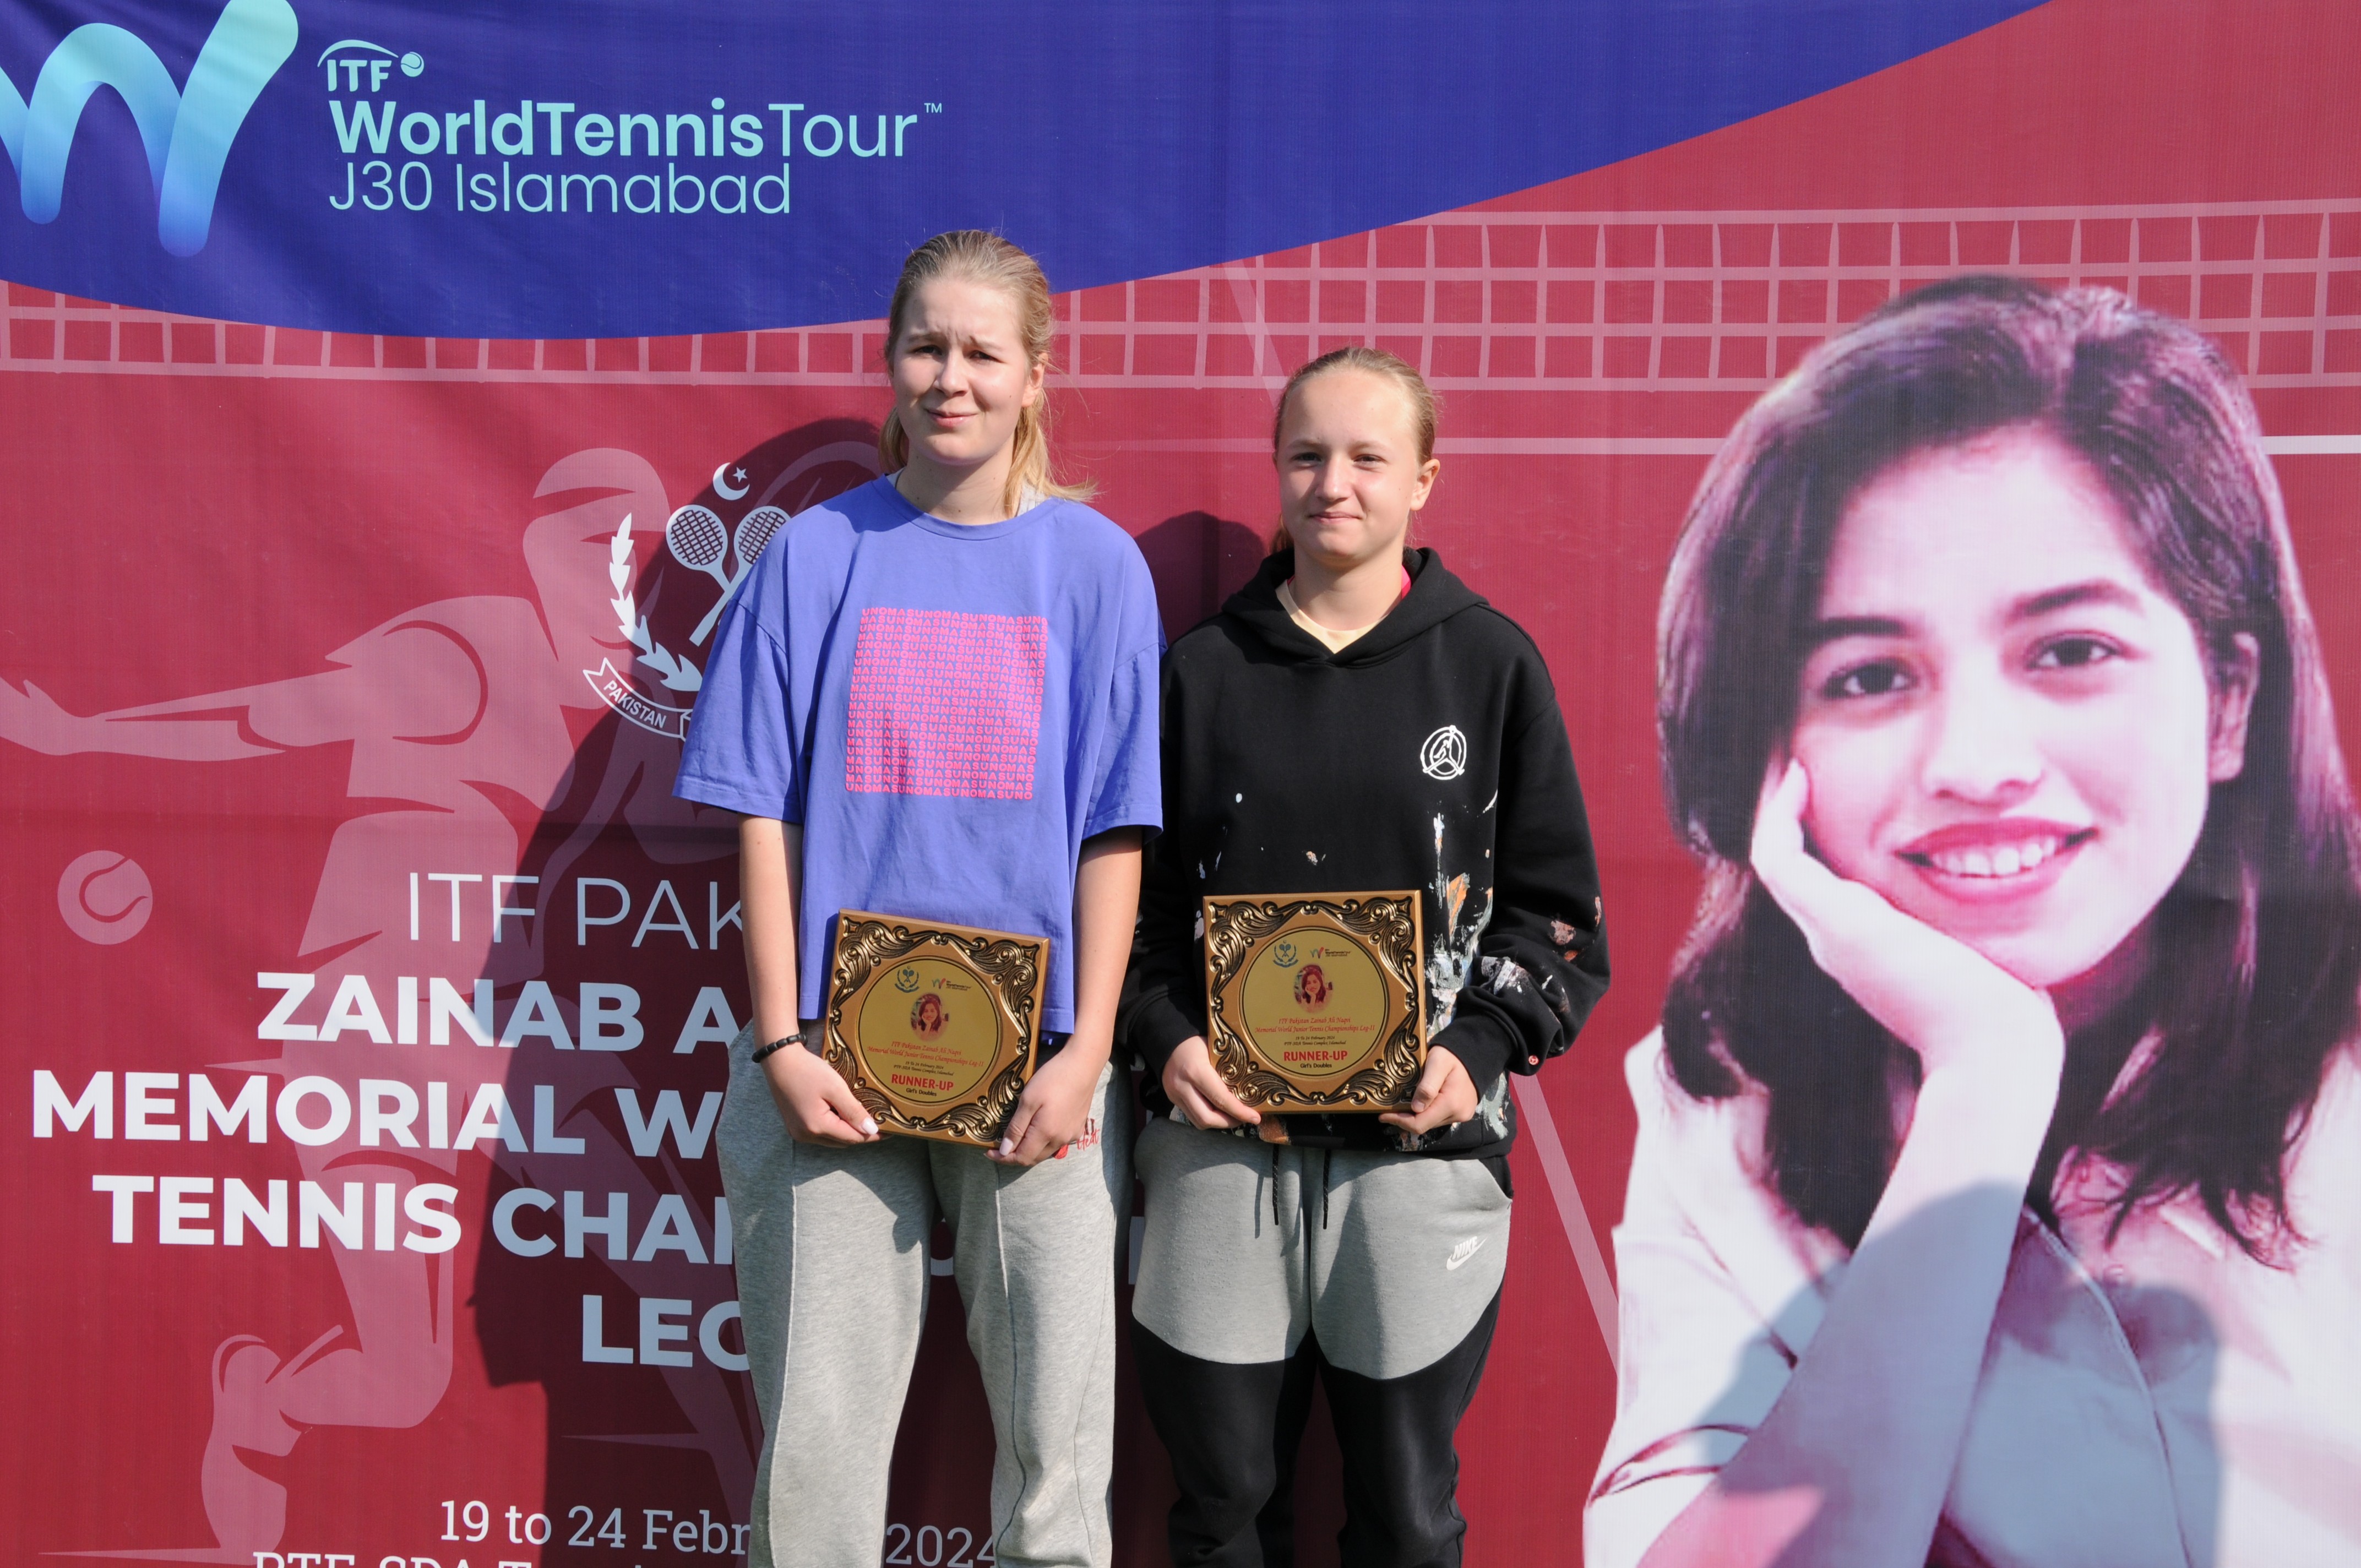 Tennis players posing with their winning trophy